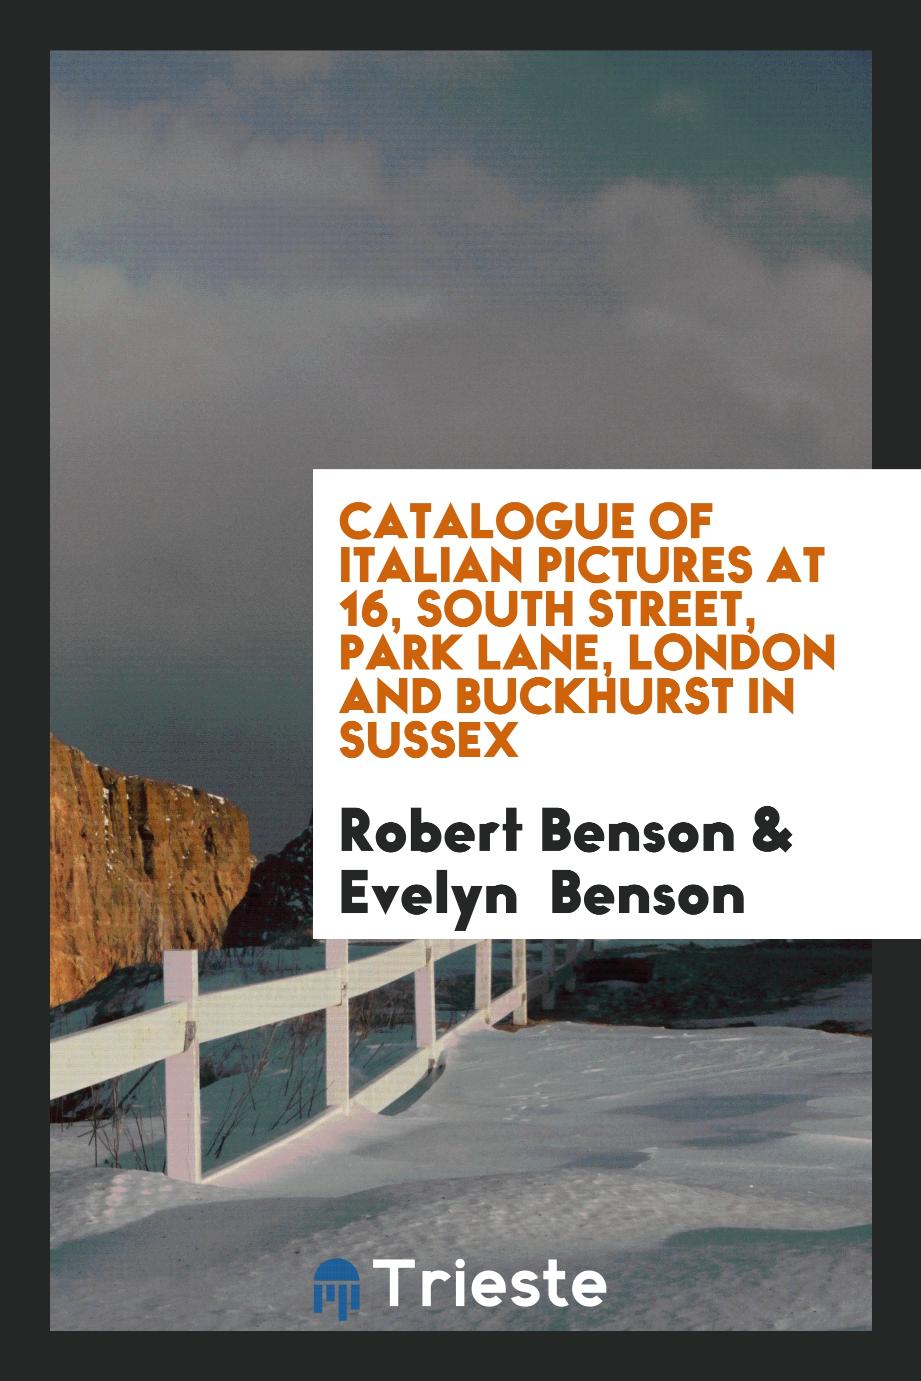 Catalogue of Italian pictures at 16, South street, Park Lane, London and Buckhurst in Sussex